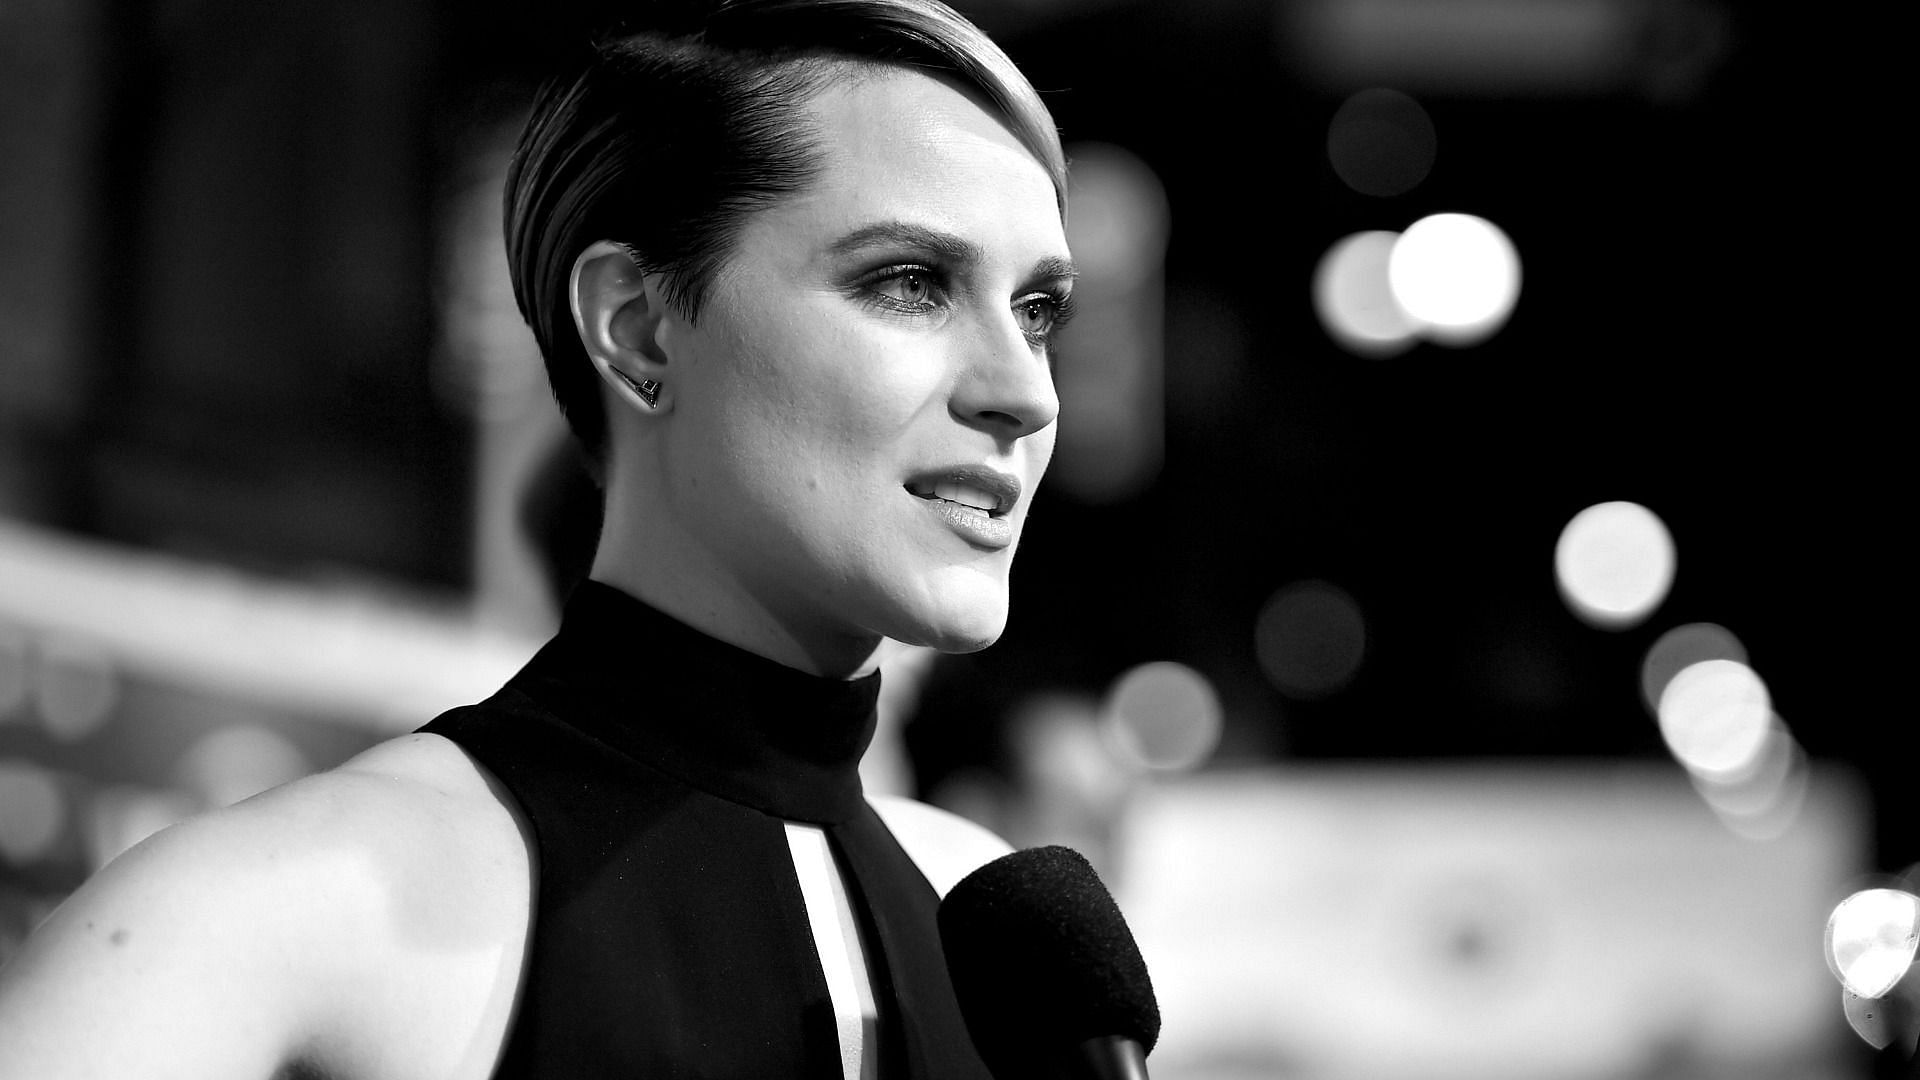 Evan Rachel Wood first publicly accused Marilyn Manson in 2021 (Image via Getty Images/ Alberto E. Rodriguez)